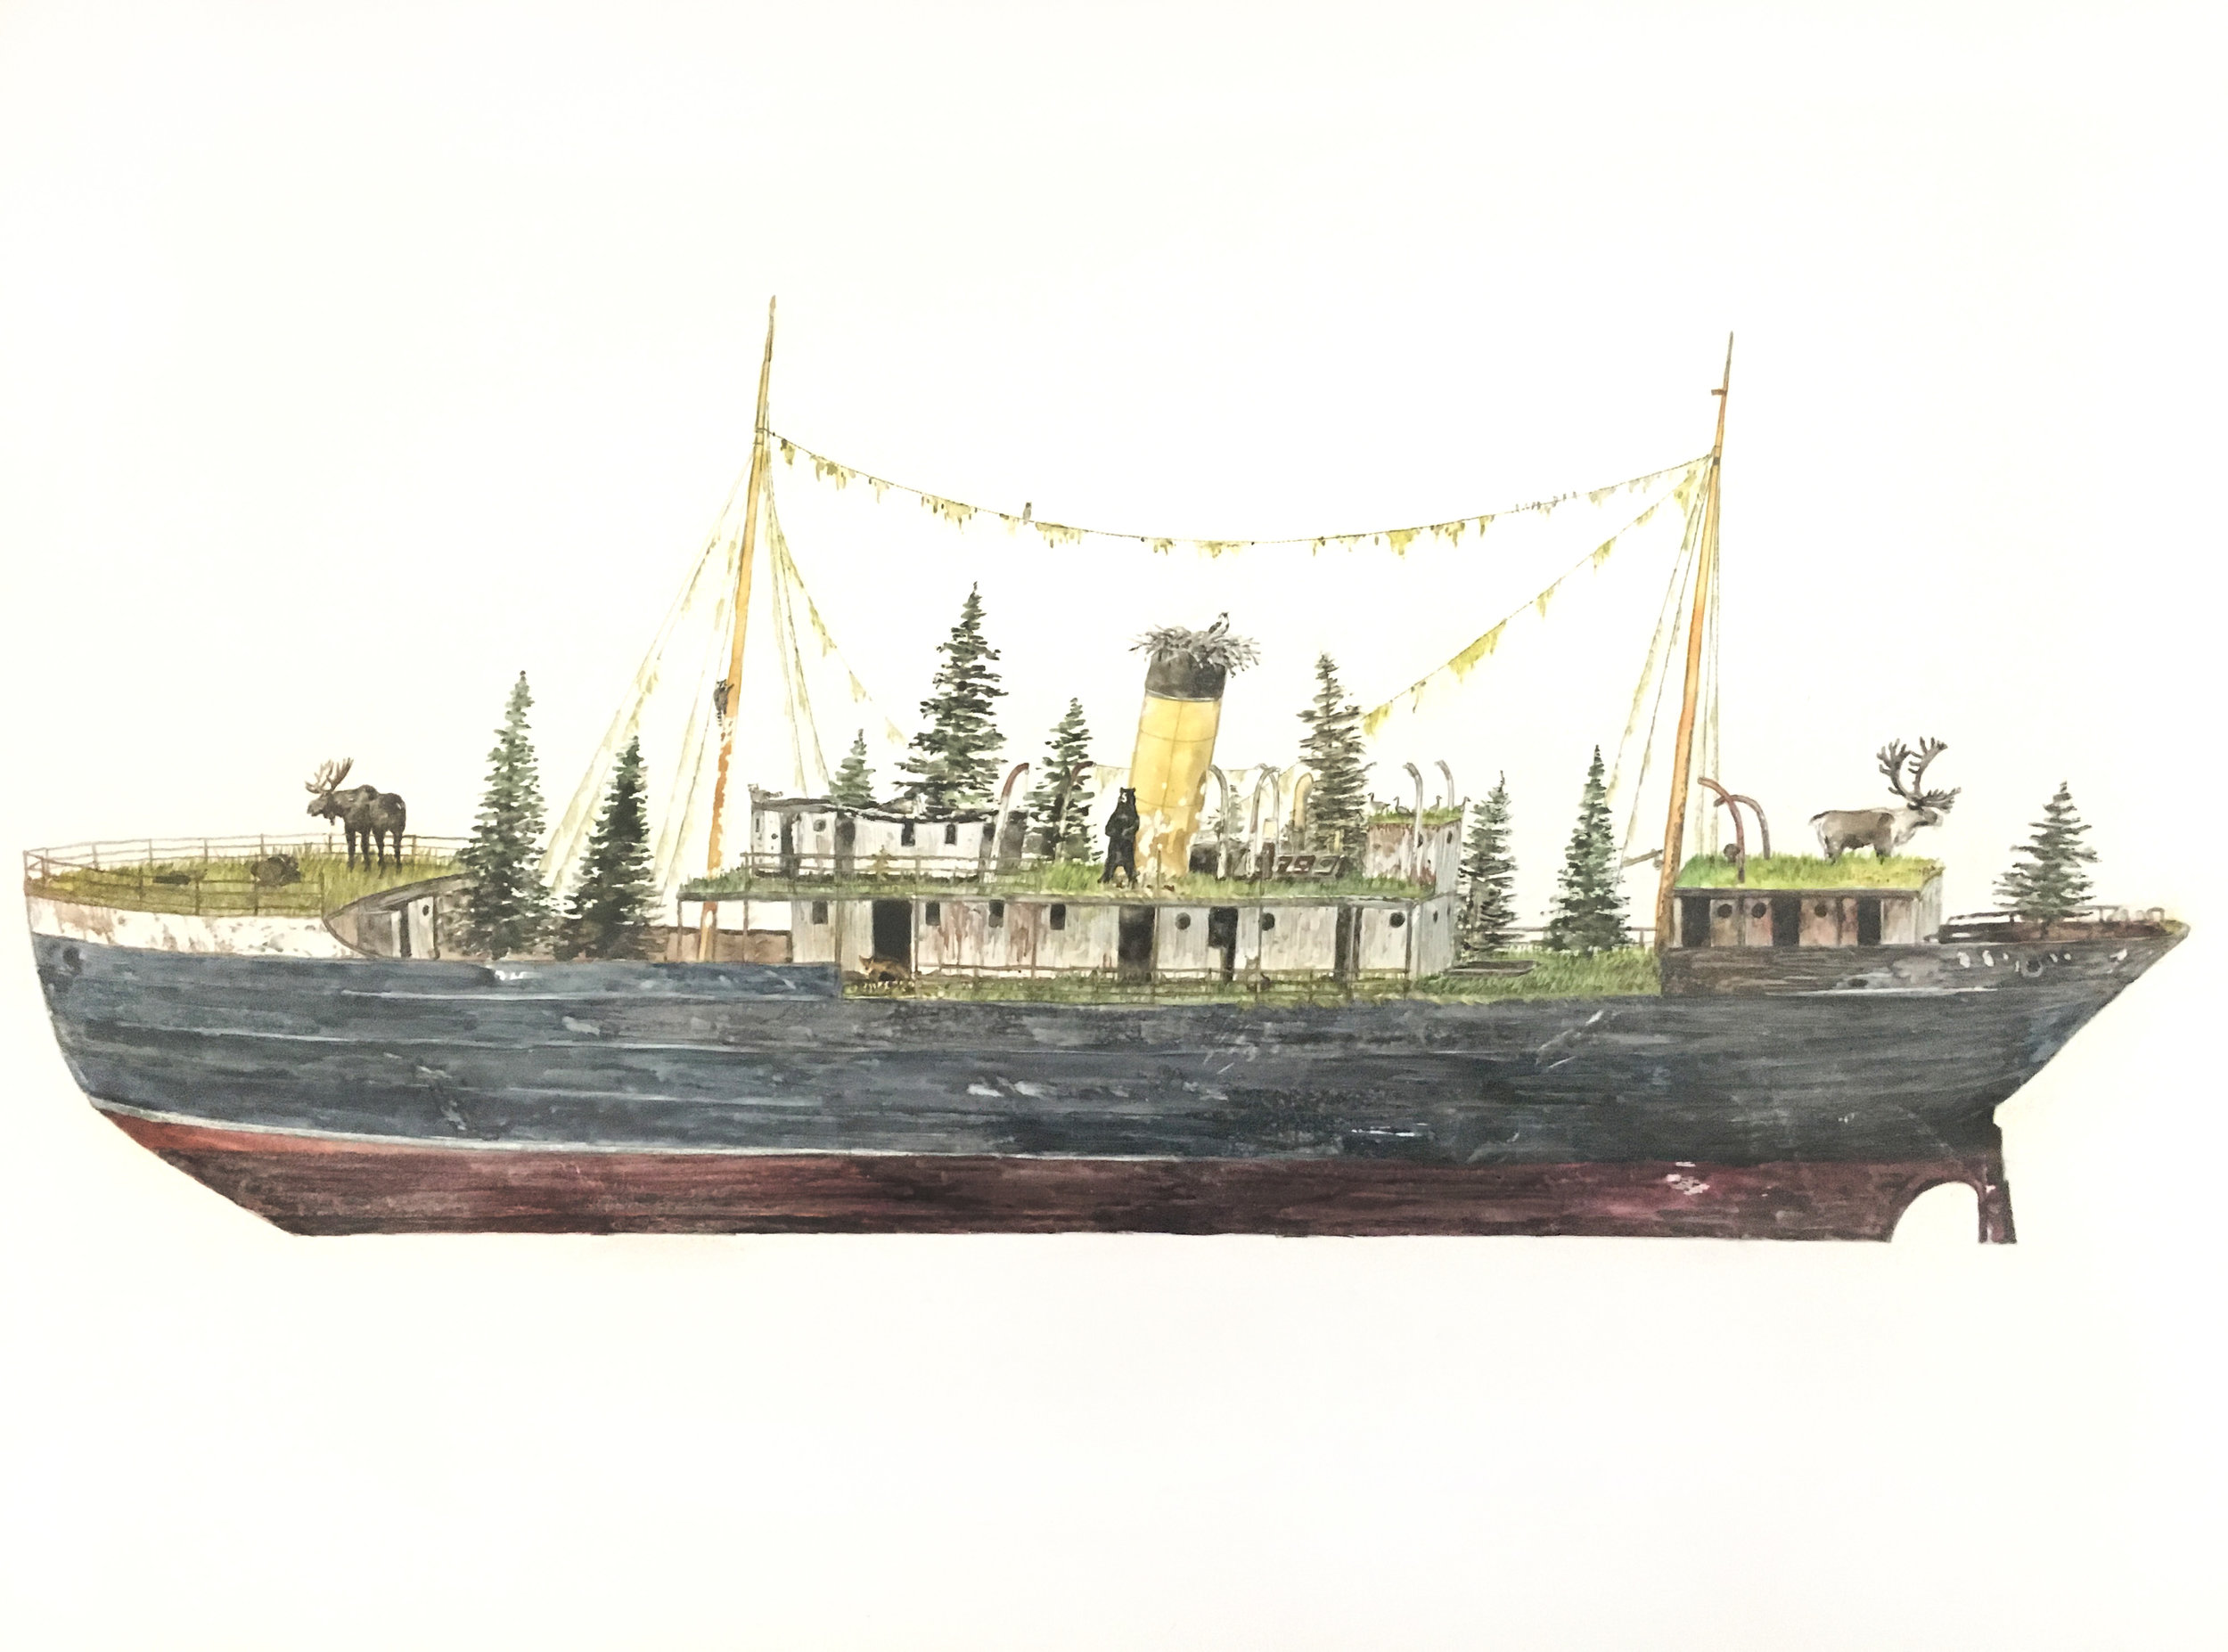    Wildership    watercolor and graphite on yupo paper  20" x 30"  2017  (sold) 